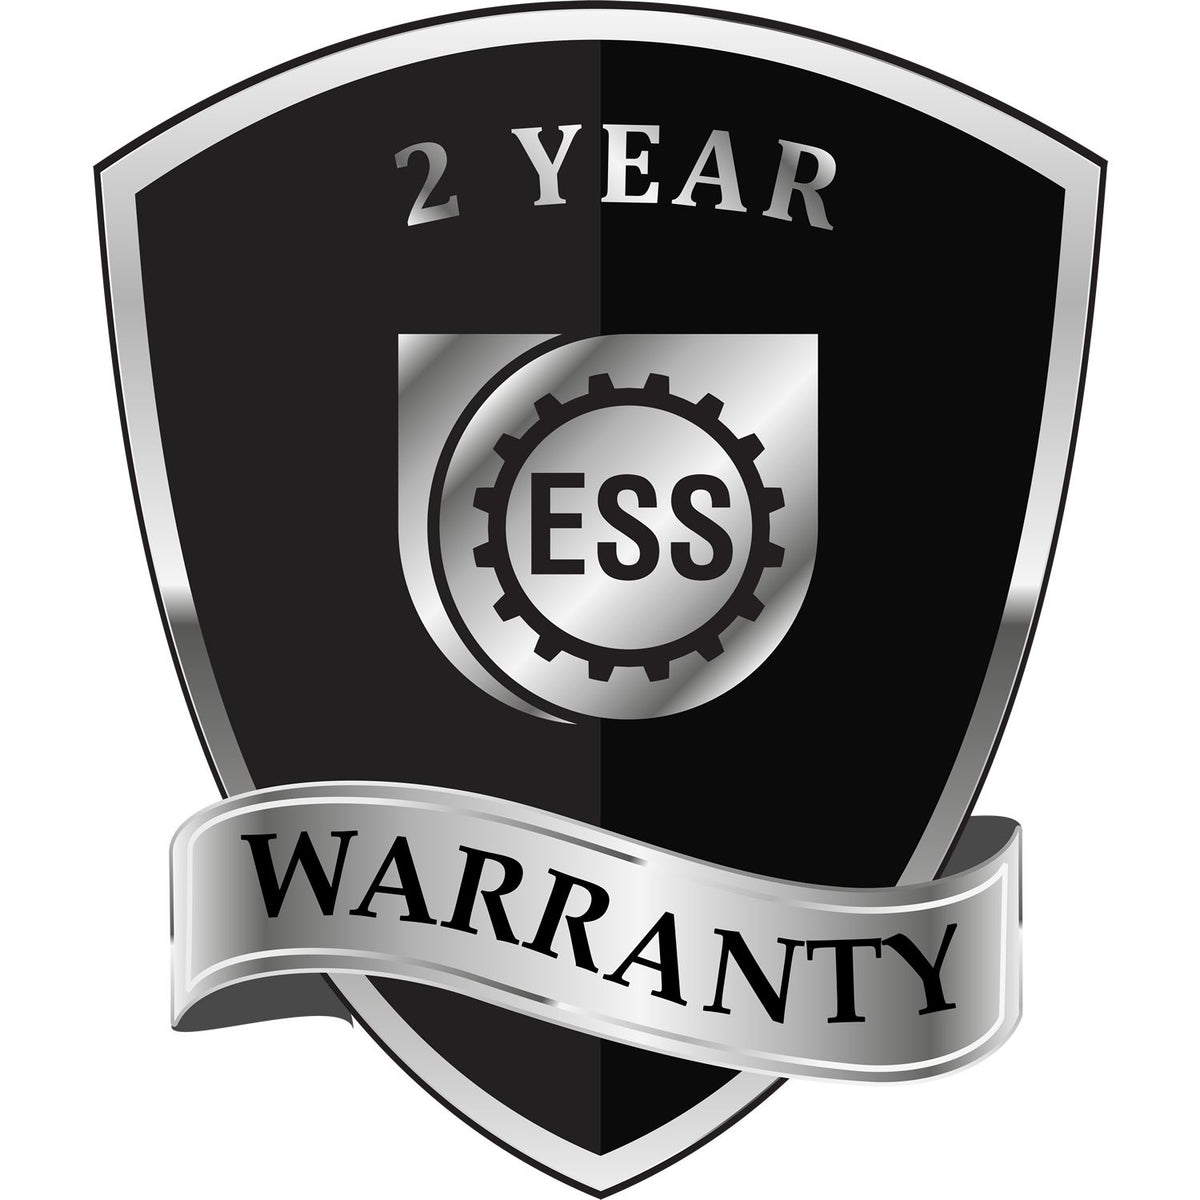 A black and silver badge or emblem showing warranty information for the Gift Utah Engineer Seal